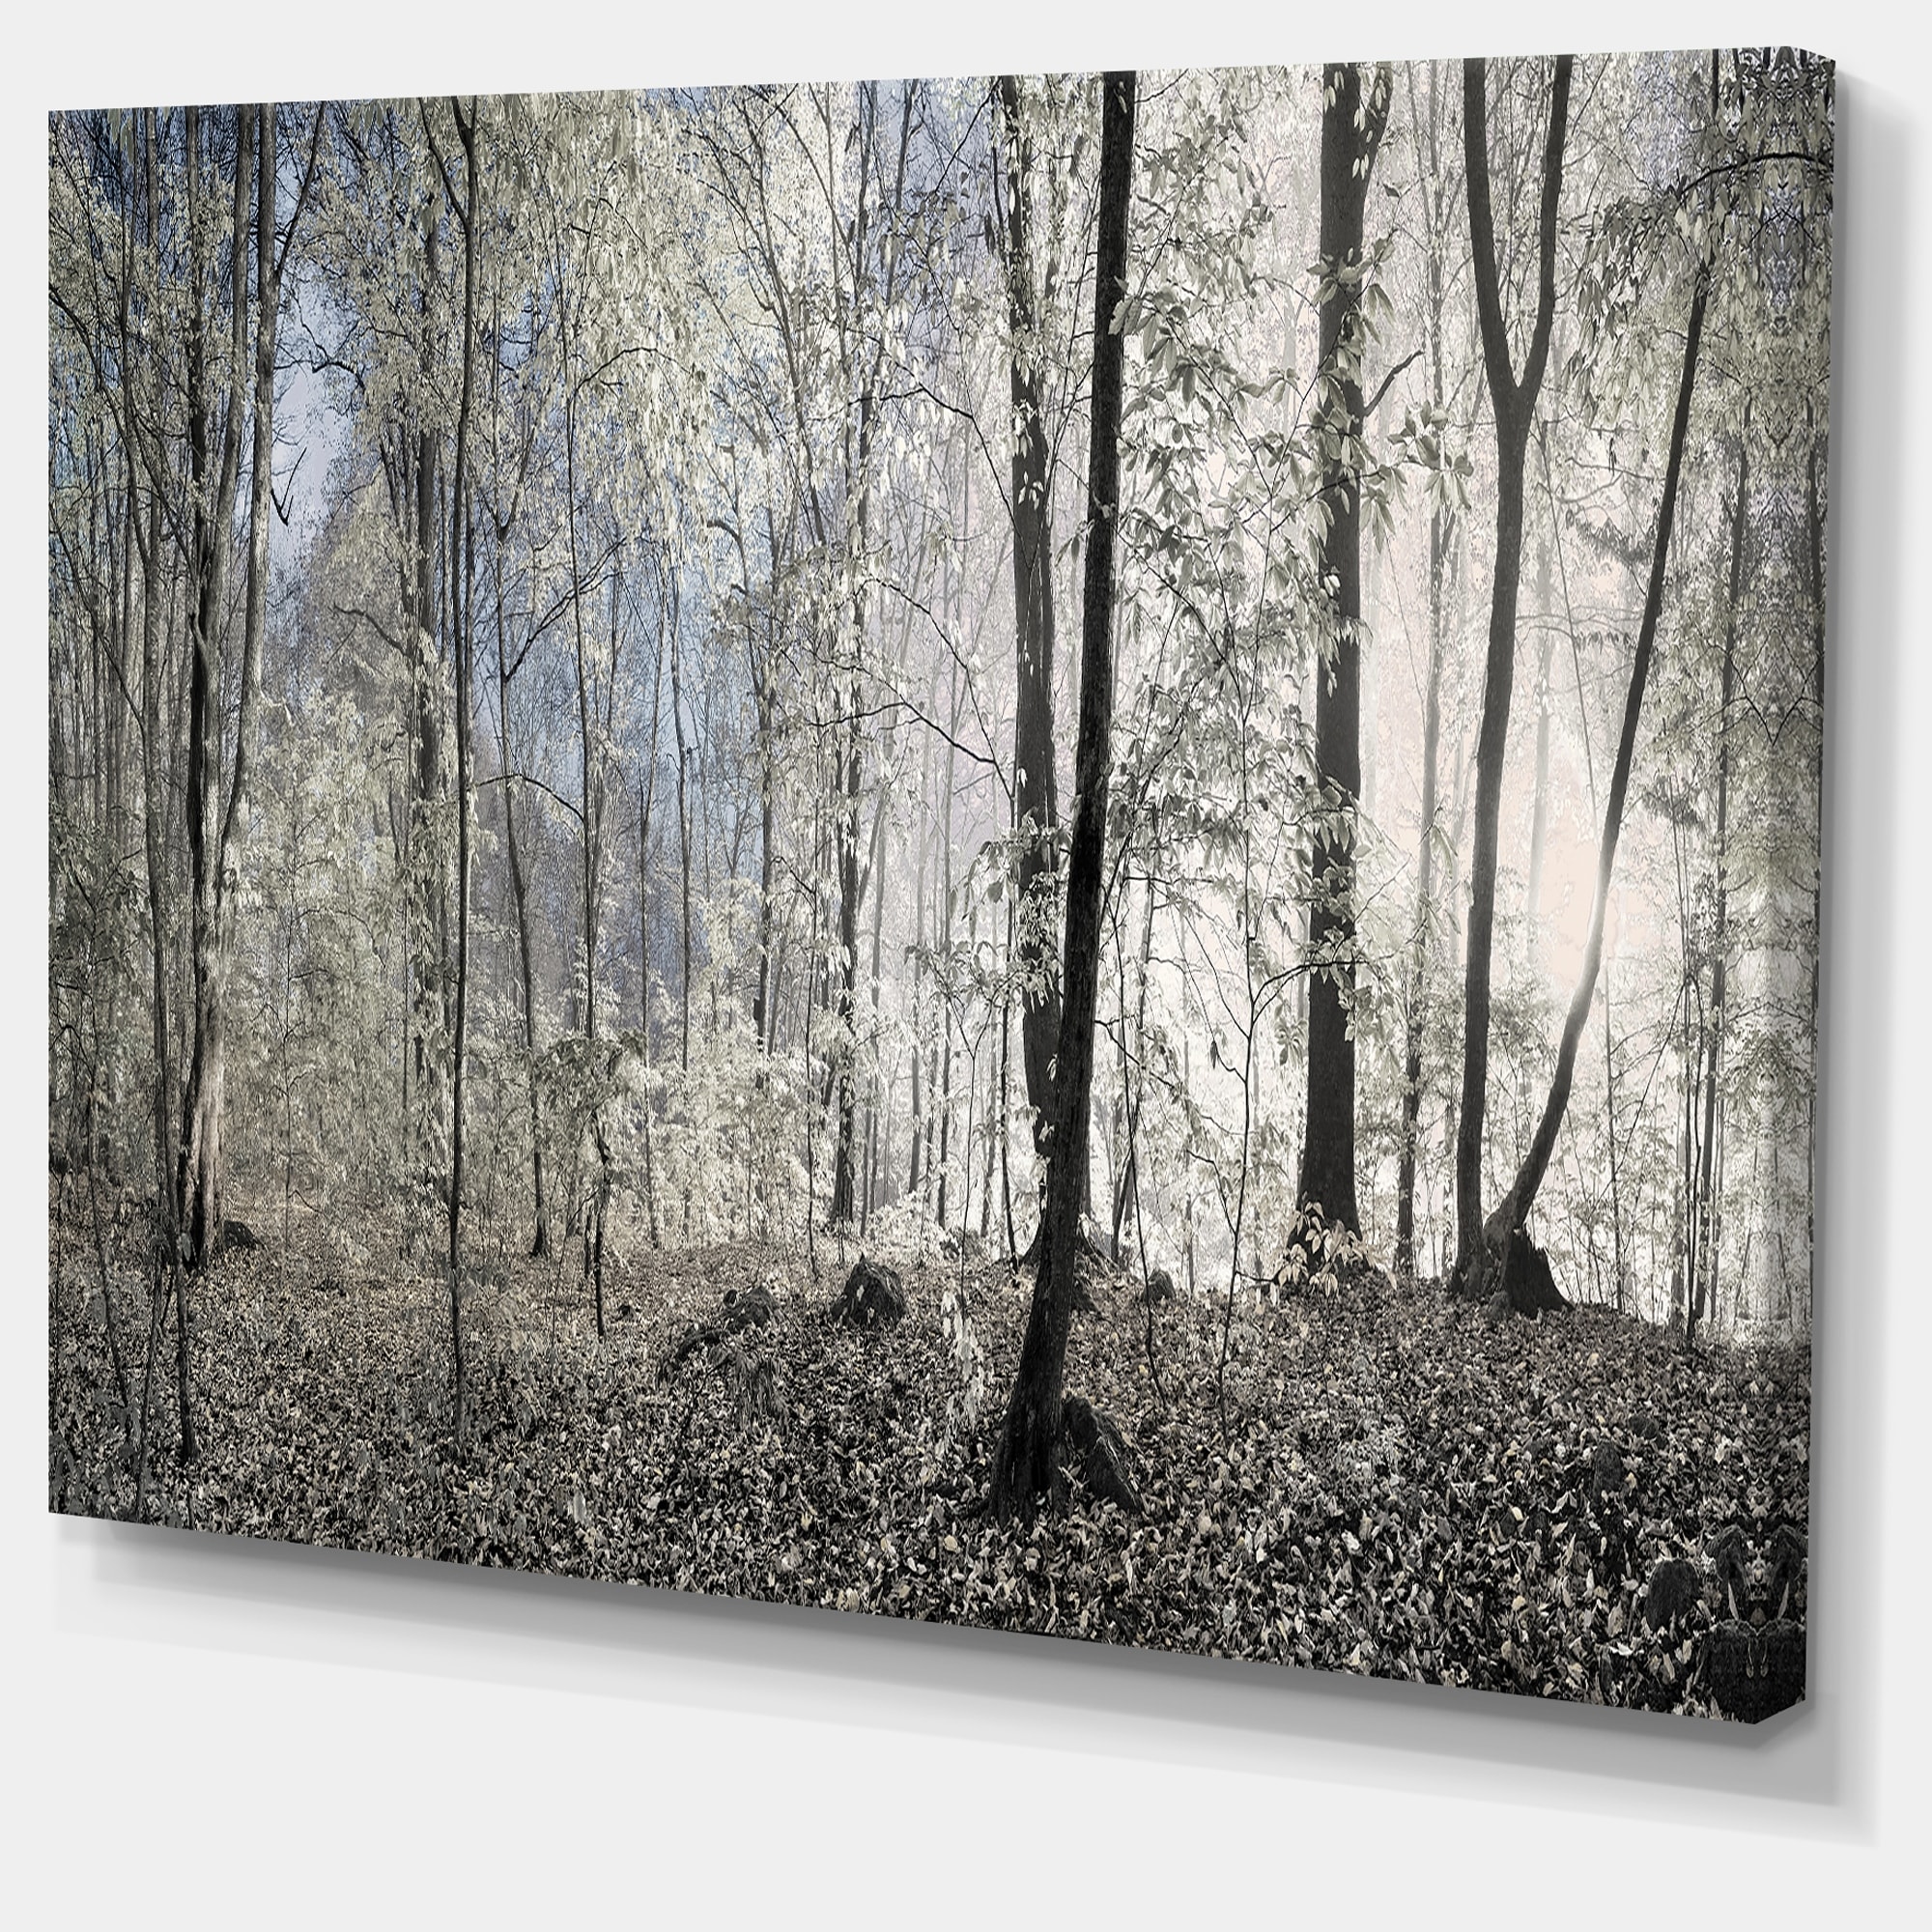 https://ak1.ostkcdn.com/images/products/is/images/direct/b736c16523aa7d7f8ffd5bdf746ba82d9a6200c6/Designart-%27Dark-Morning-in-Forest-Panorama%27-Landscape-Large-Canvas-Art-Print.jpg